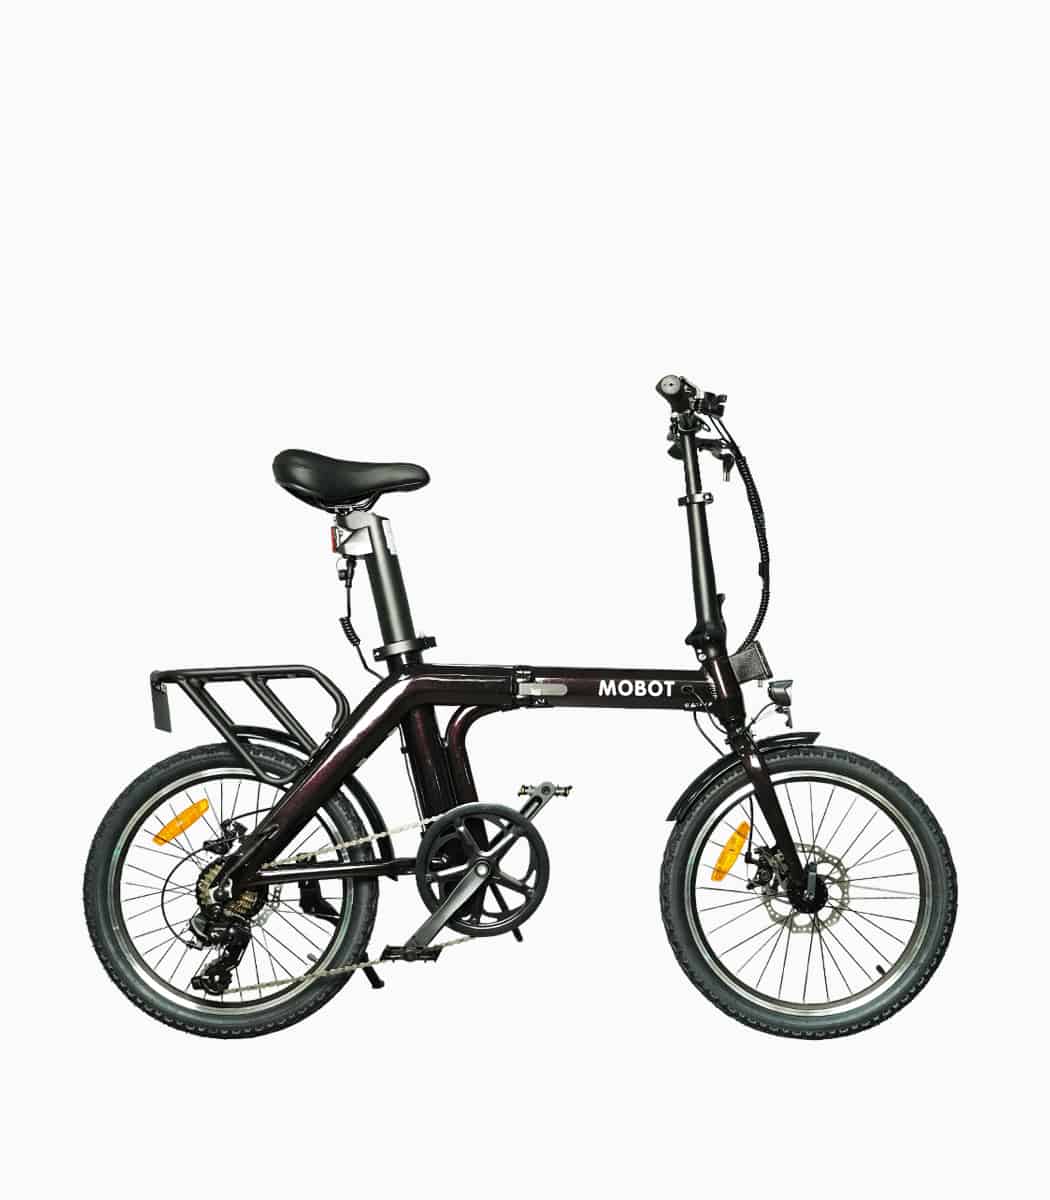 MOBOT S3 (BLACK CHERRY PEARL) LTA approved electric bicycle right